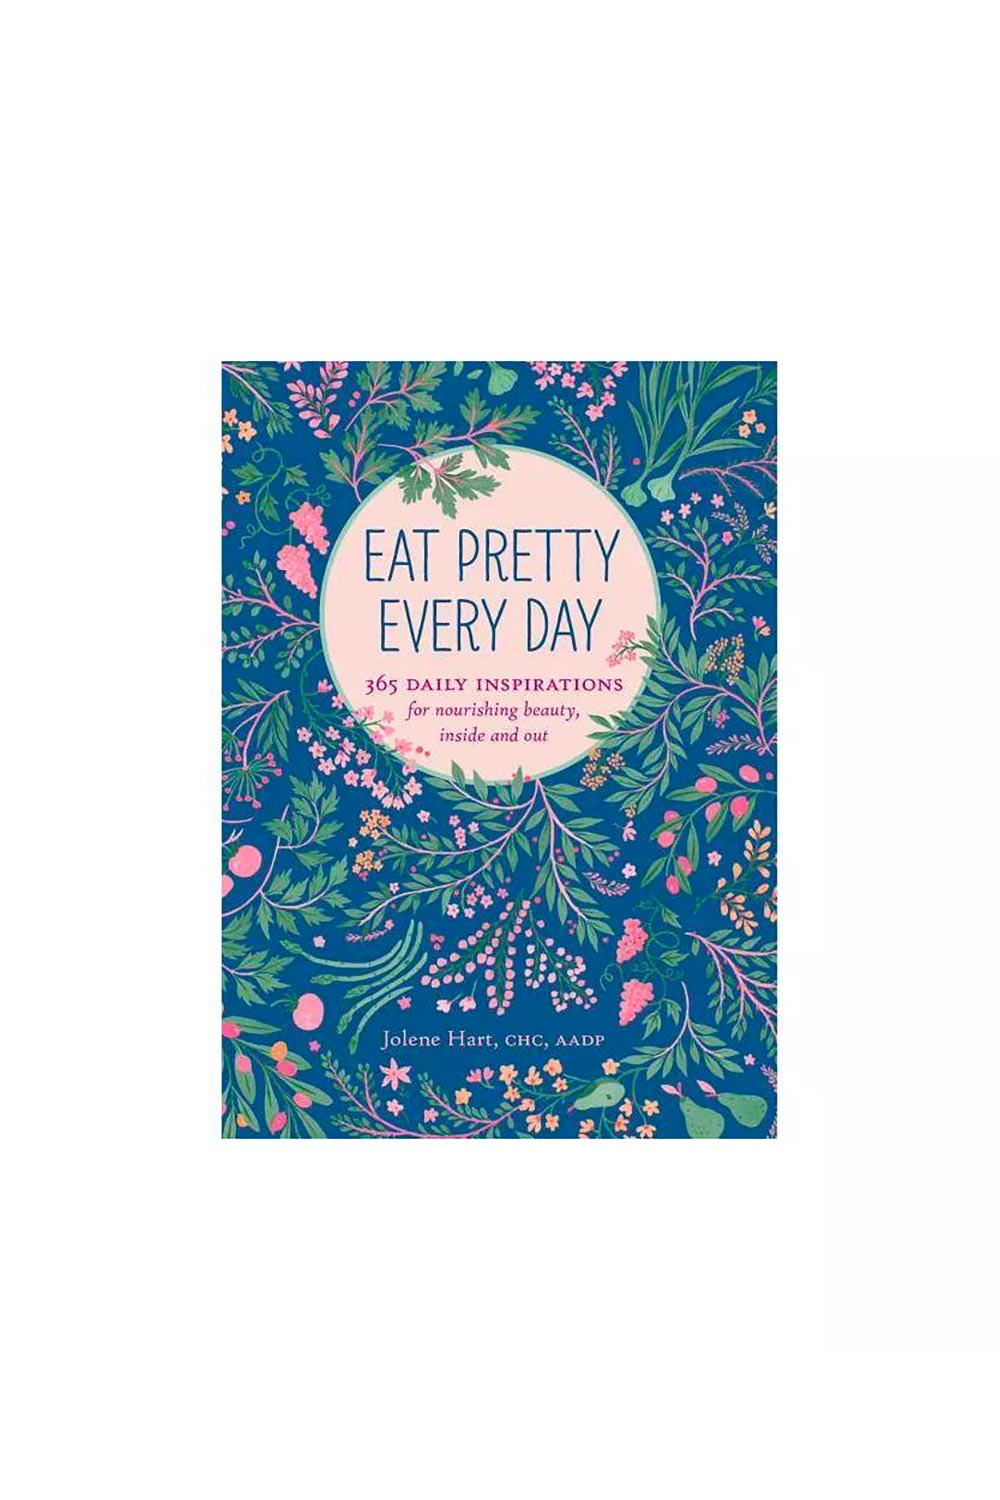 EAT PRETTY EVERY DAY